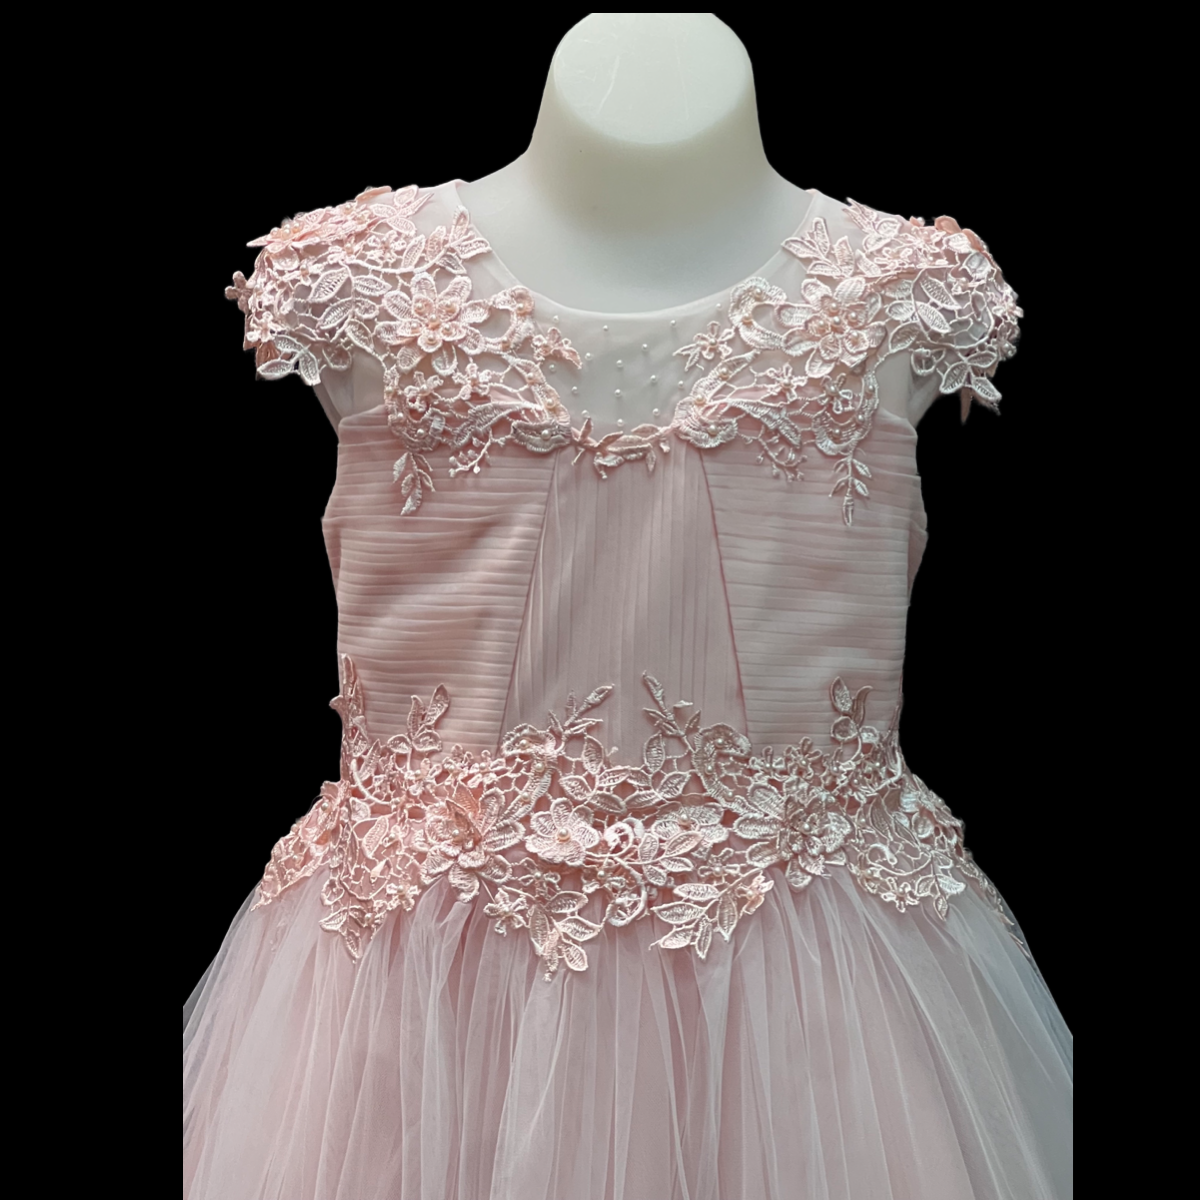 Pink Cap Sleeve Dress w/ Beading Embroidery